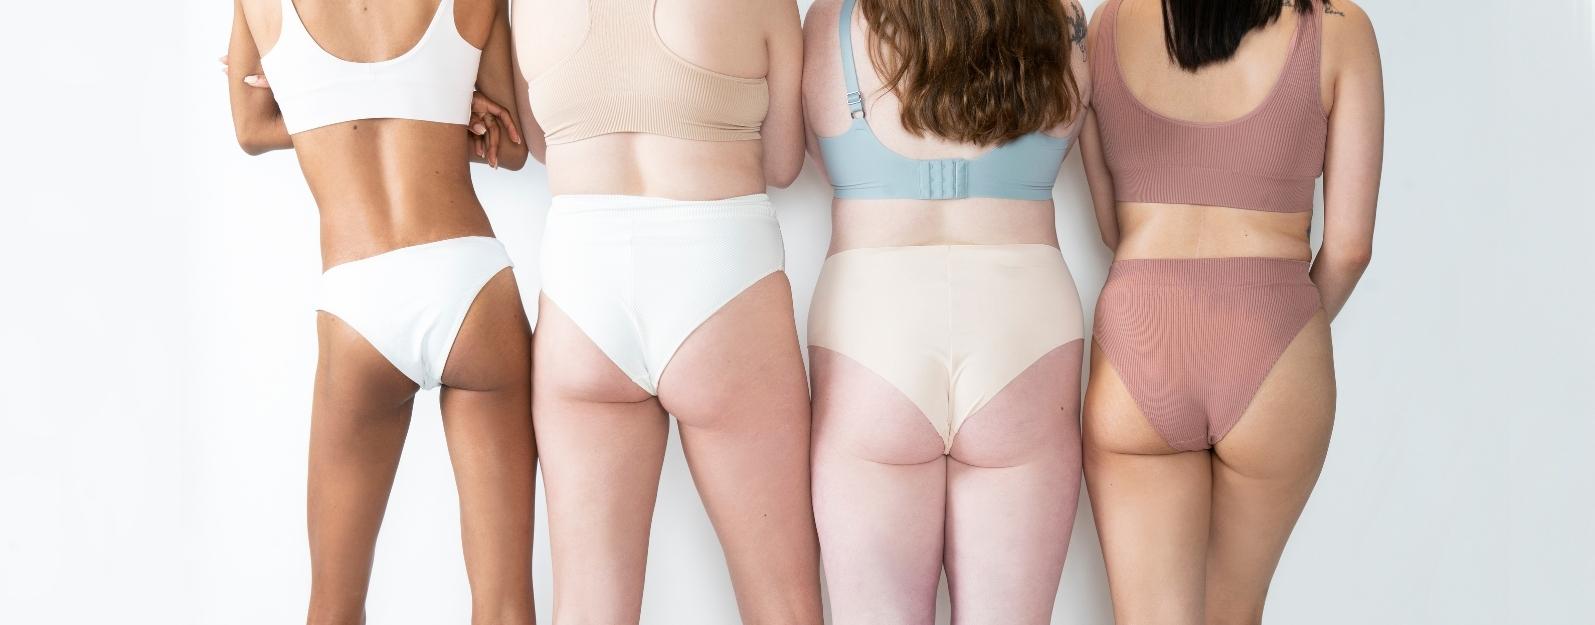 How to Get a Better Butt: 10 Best Products for Your Booty